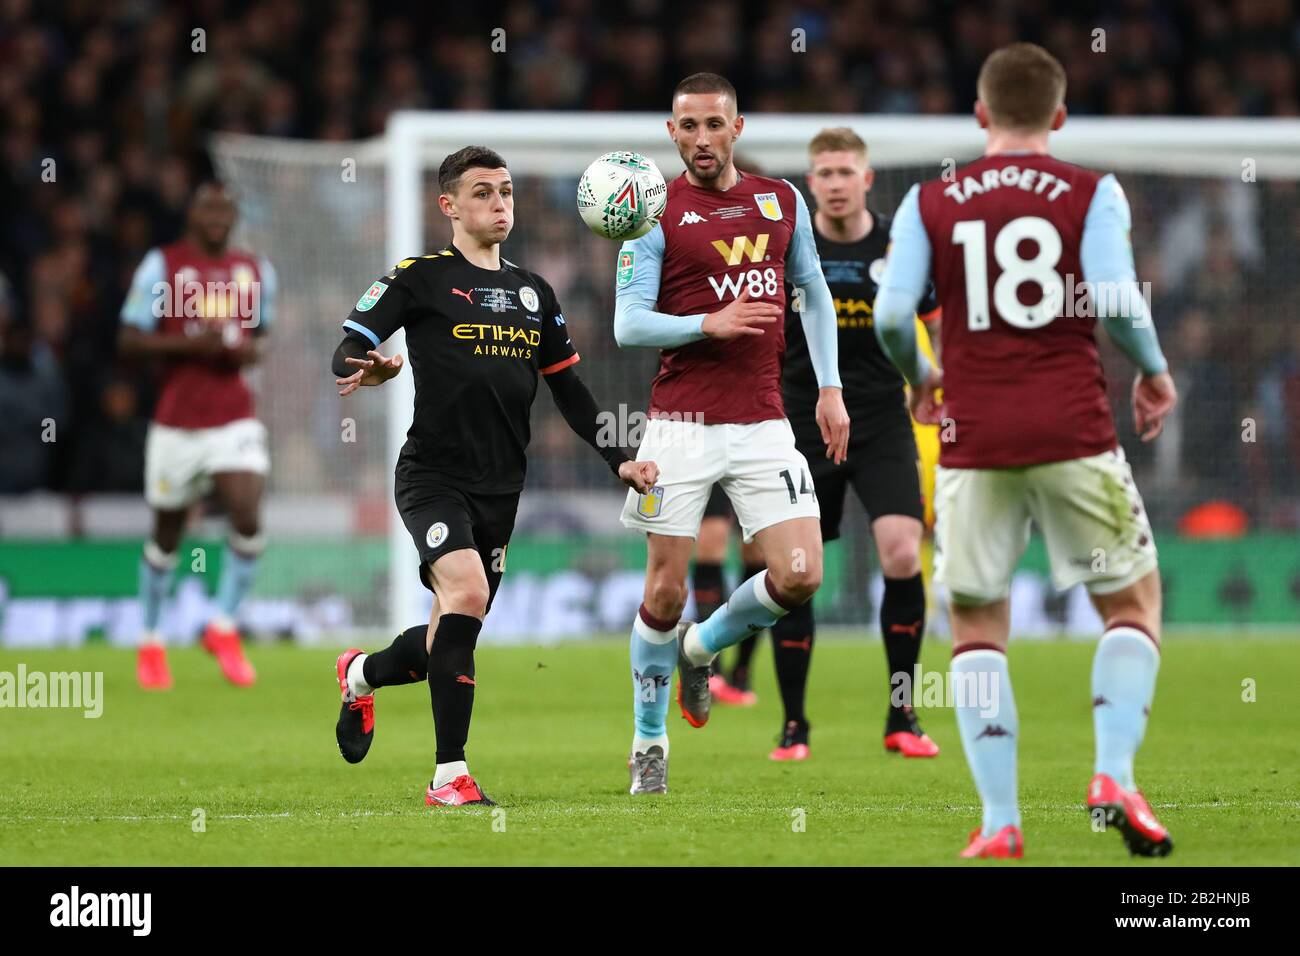 Phil Foden of Manchester City and Conor Hourihane of Aston Villa in action - Aston Villa v Manchester City, Carabao Cup Final, Wembley Stadium, London, UK - 1st March 2020  Editorial Use Only - DataCo restrictions apply Stock Photo